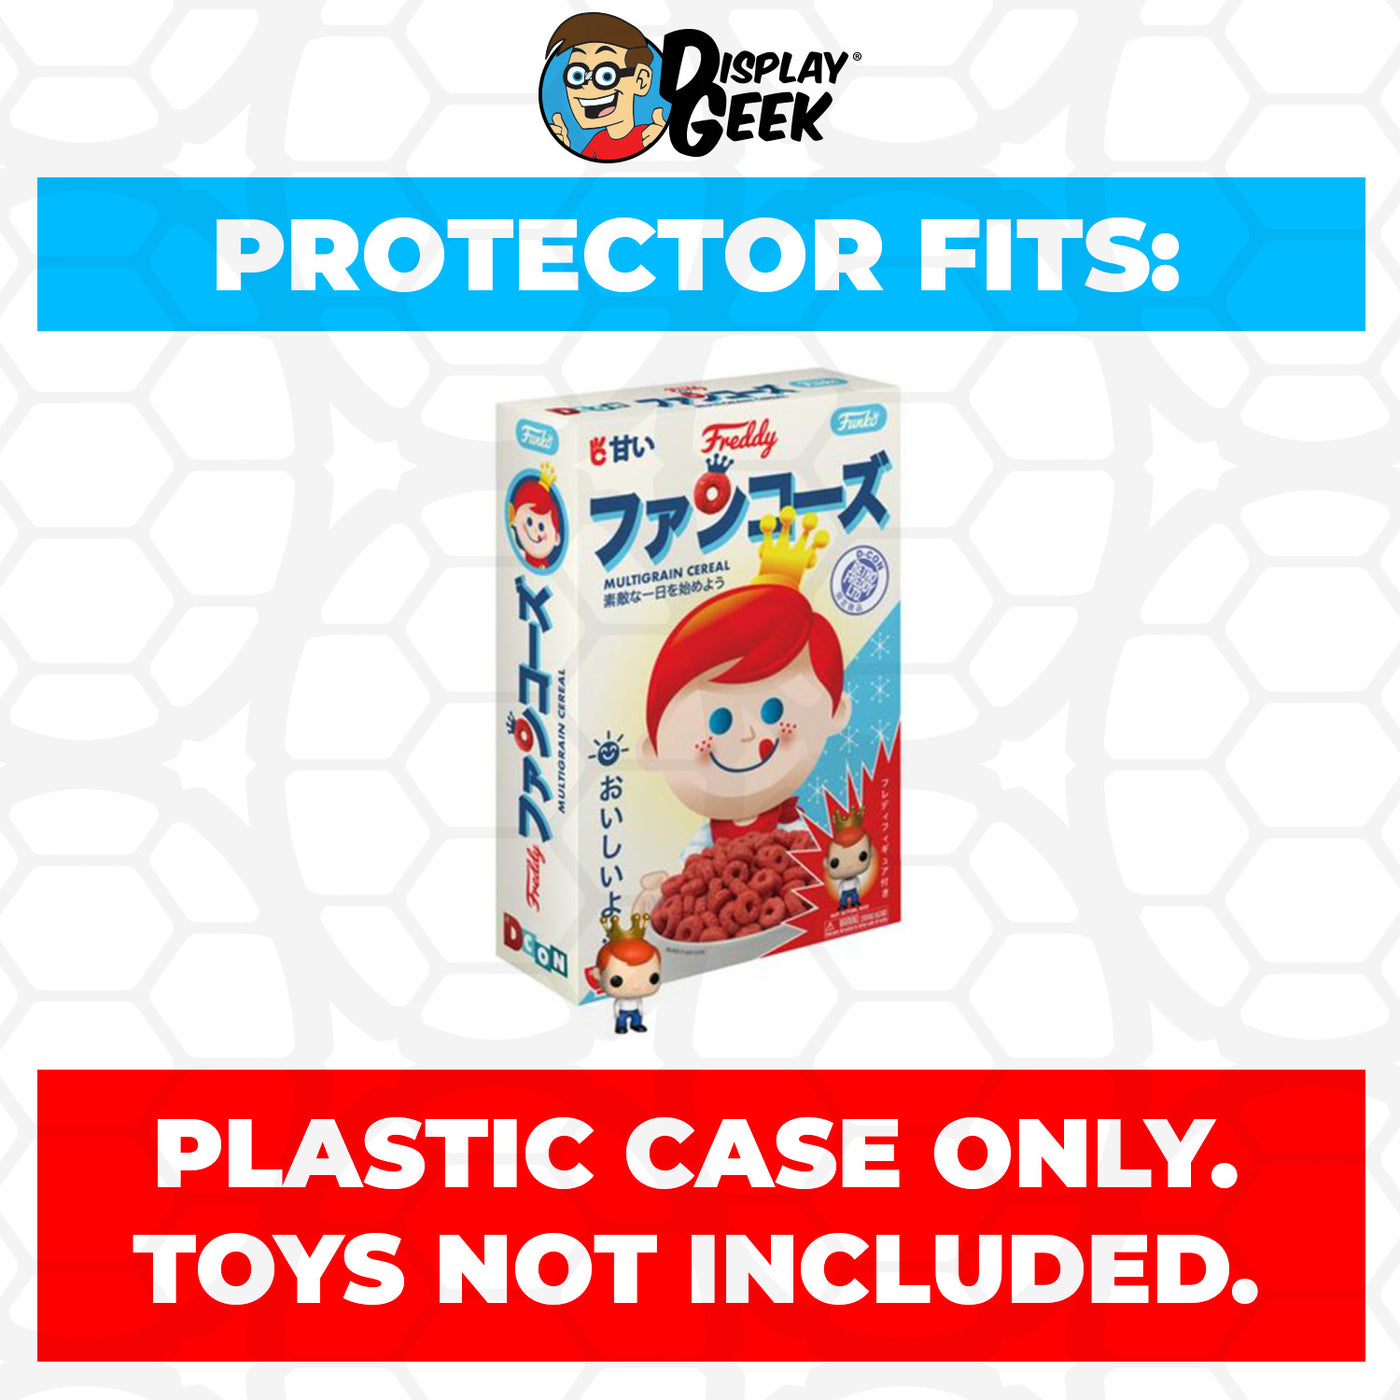 Pop Protector for Japanese Freddy Funko Pop D-Con FunkO's Cereal Box on The Protector Guide App by Display Geek